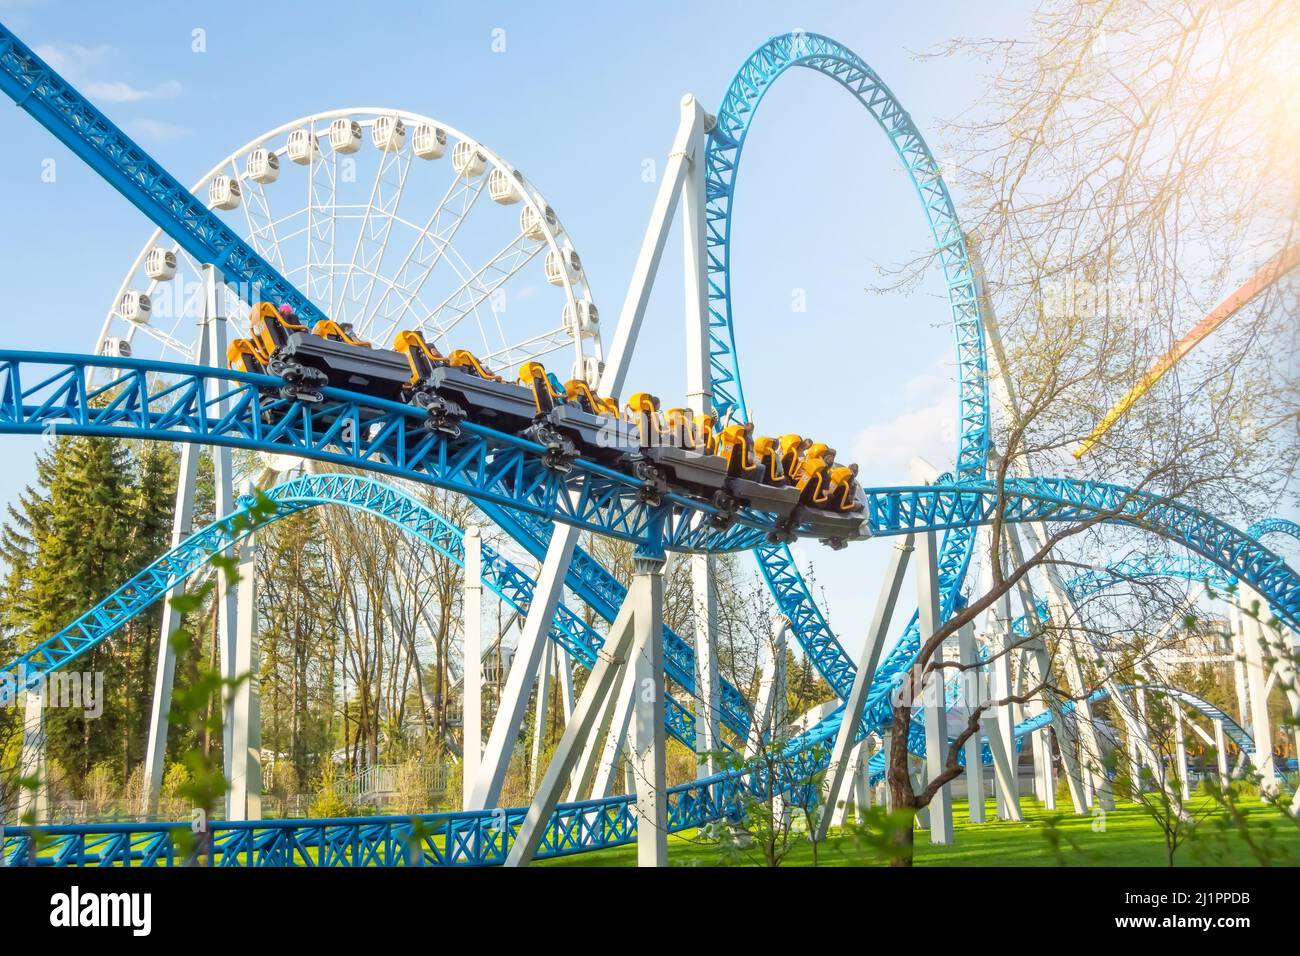 Amusement trolley makes circle loop turns rides in a spiral, roller coaster.  Ferris wheel in the background Stock Photo - Alamy